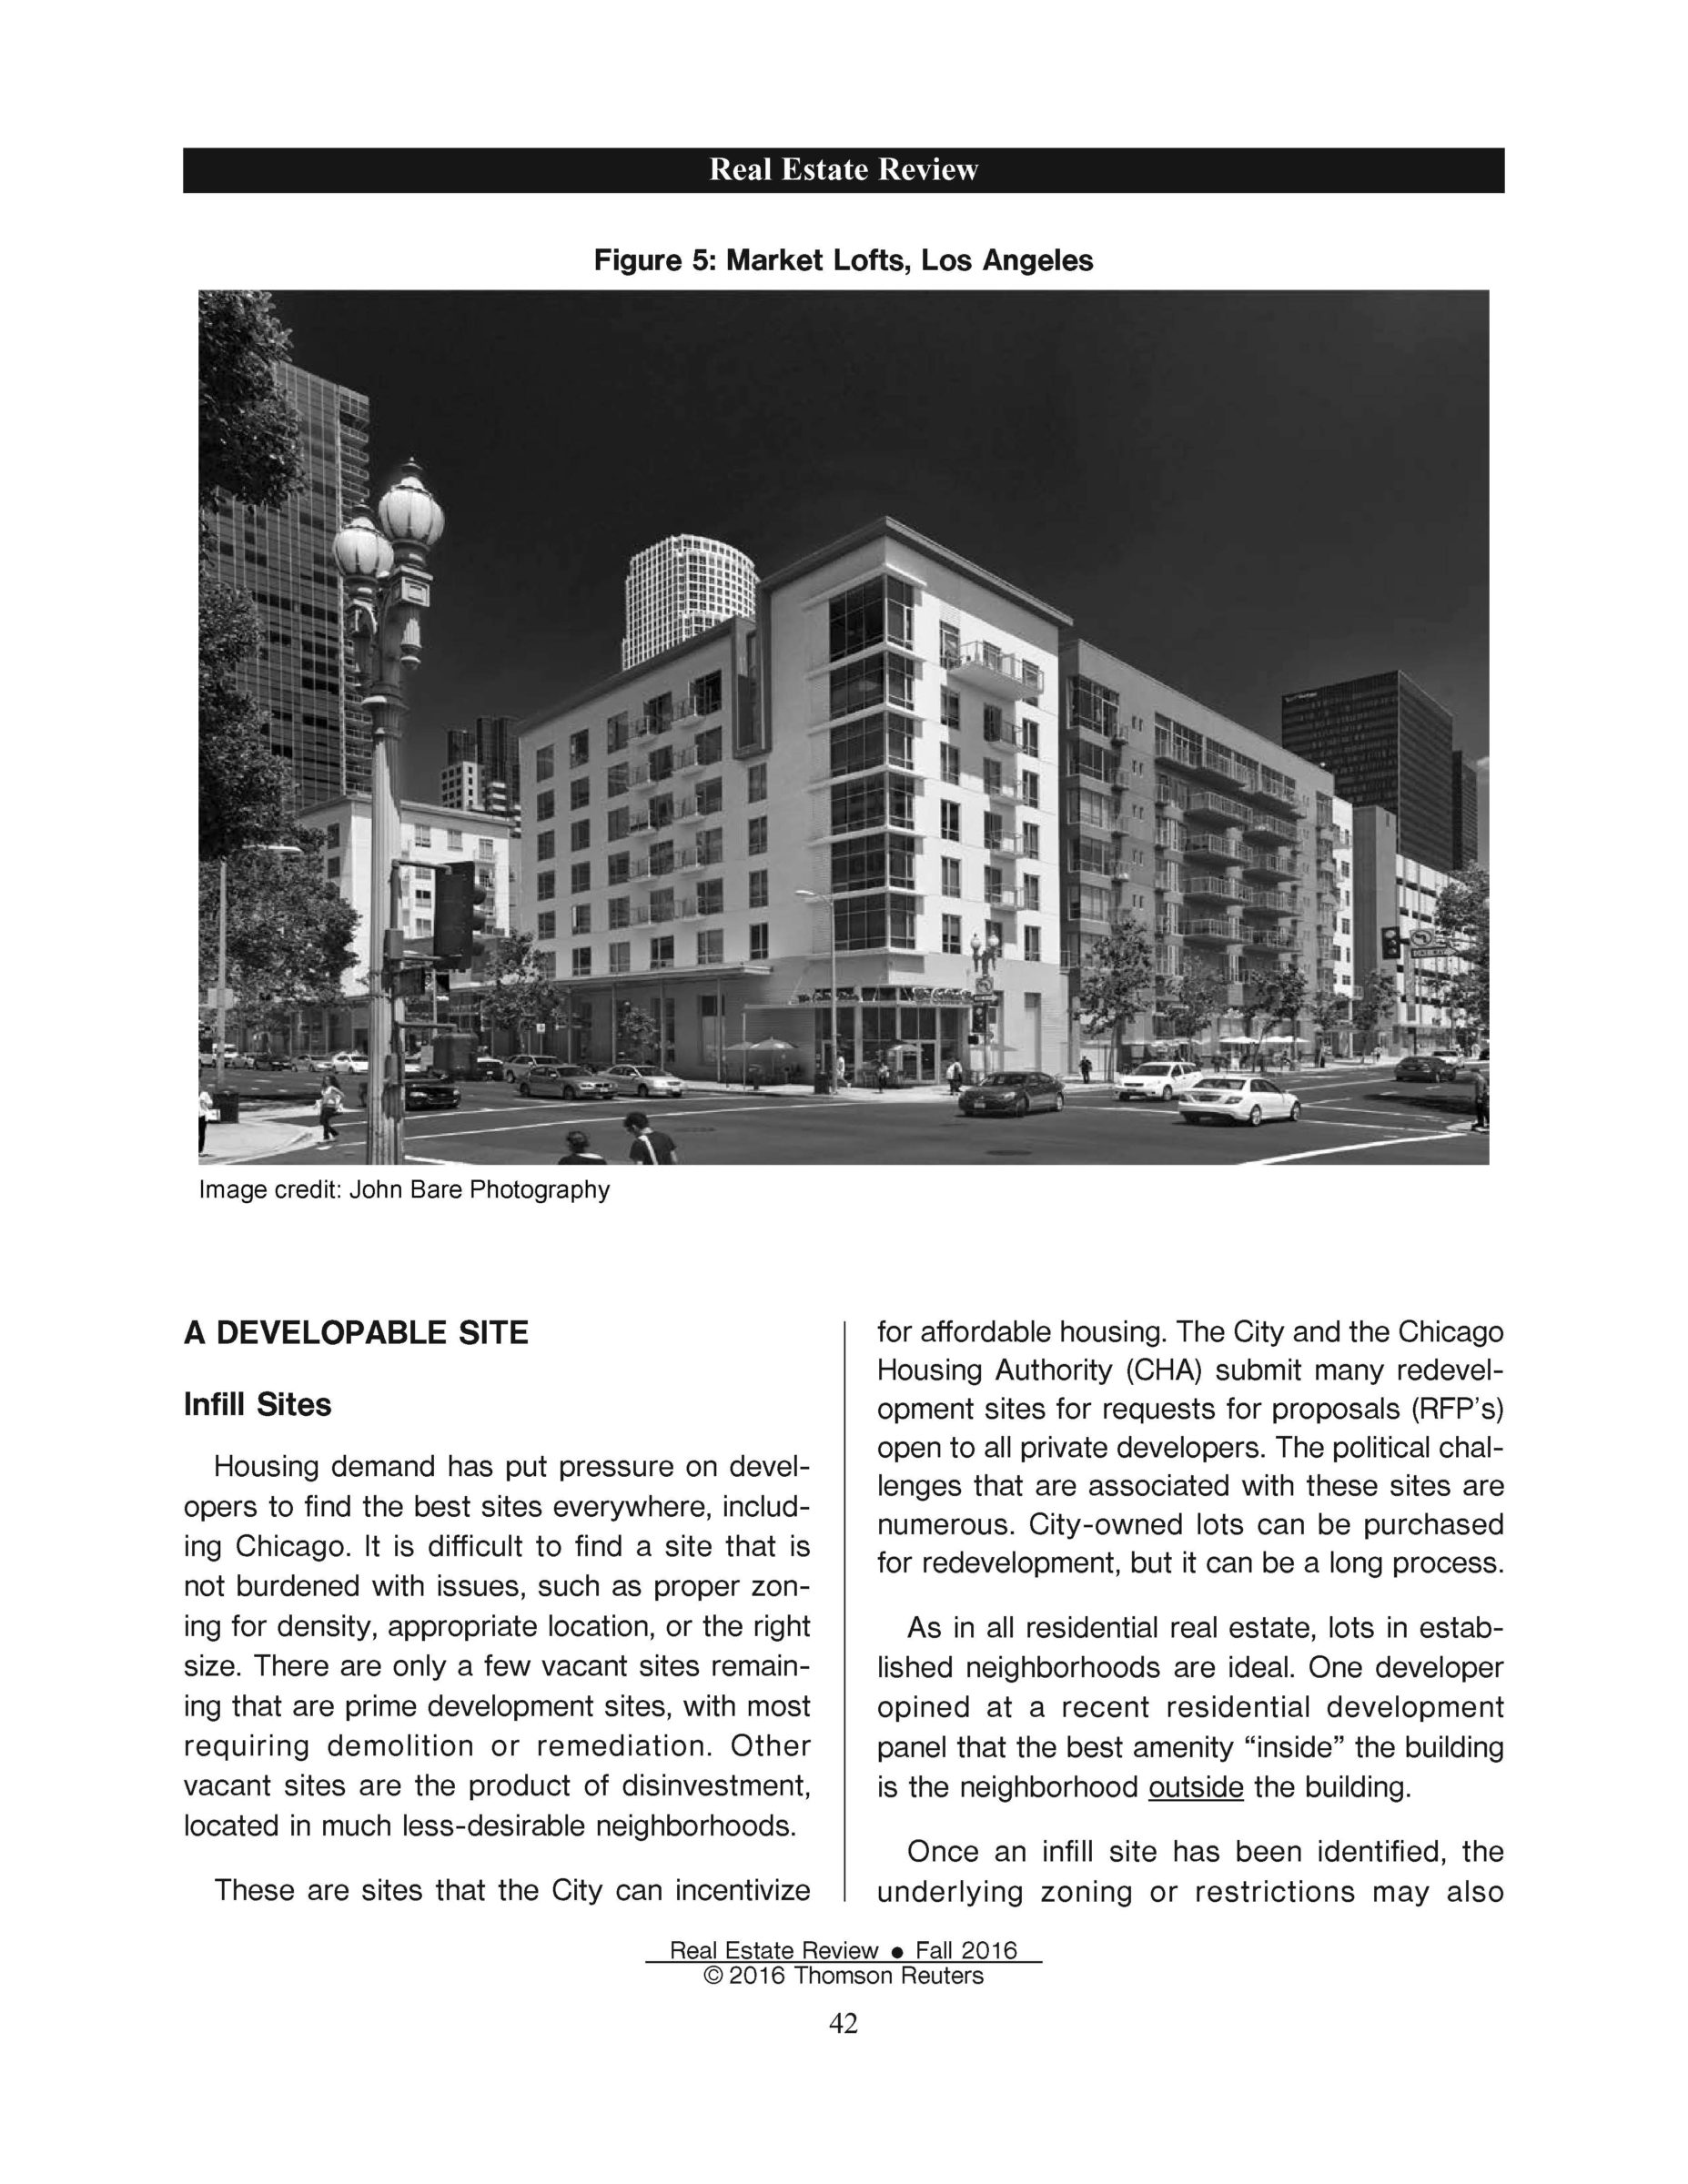 Real Estate Review (Building Mixed-Use Developments Process and Progress in Urban Design) 0916_Page_08